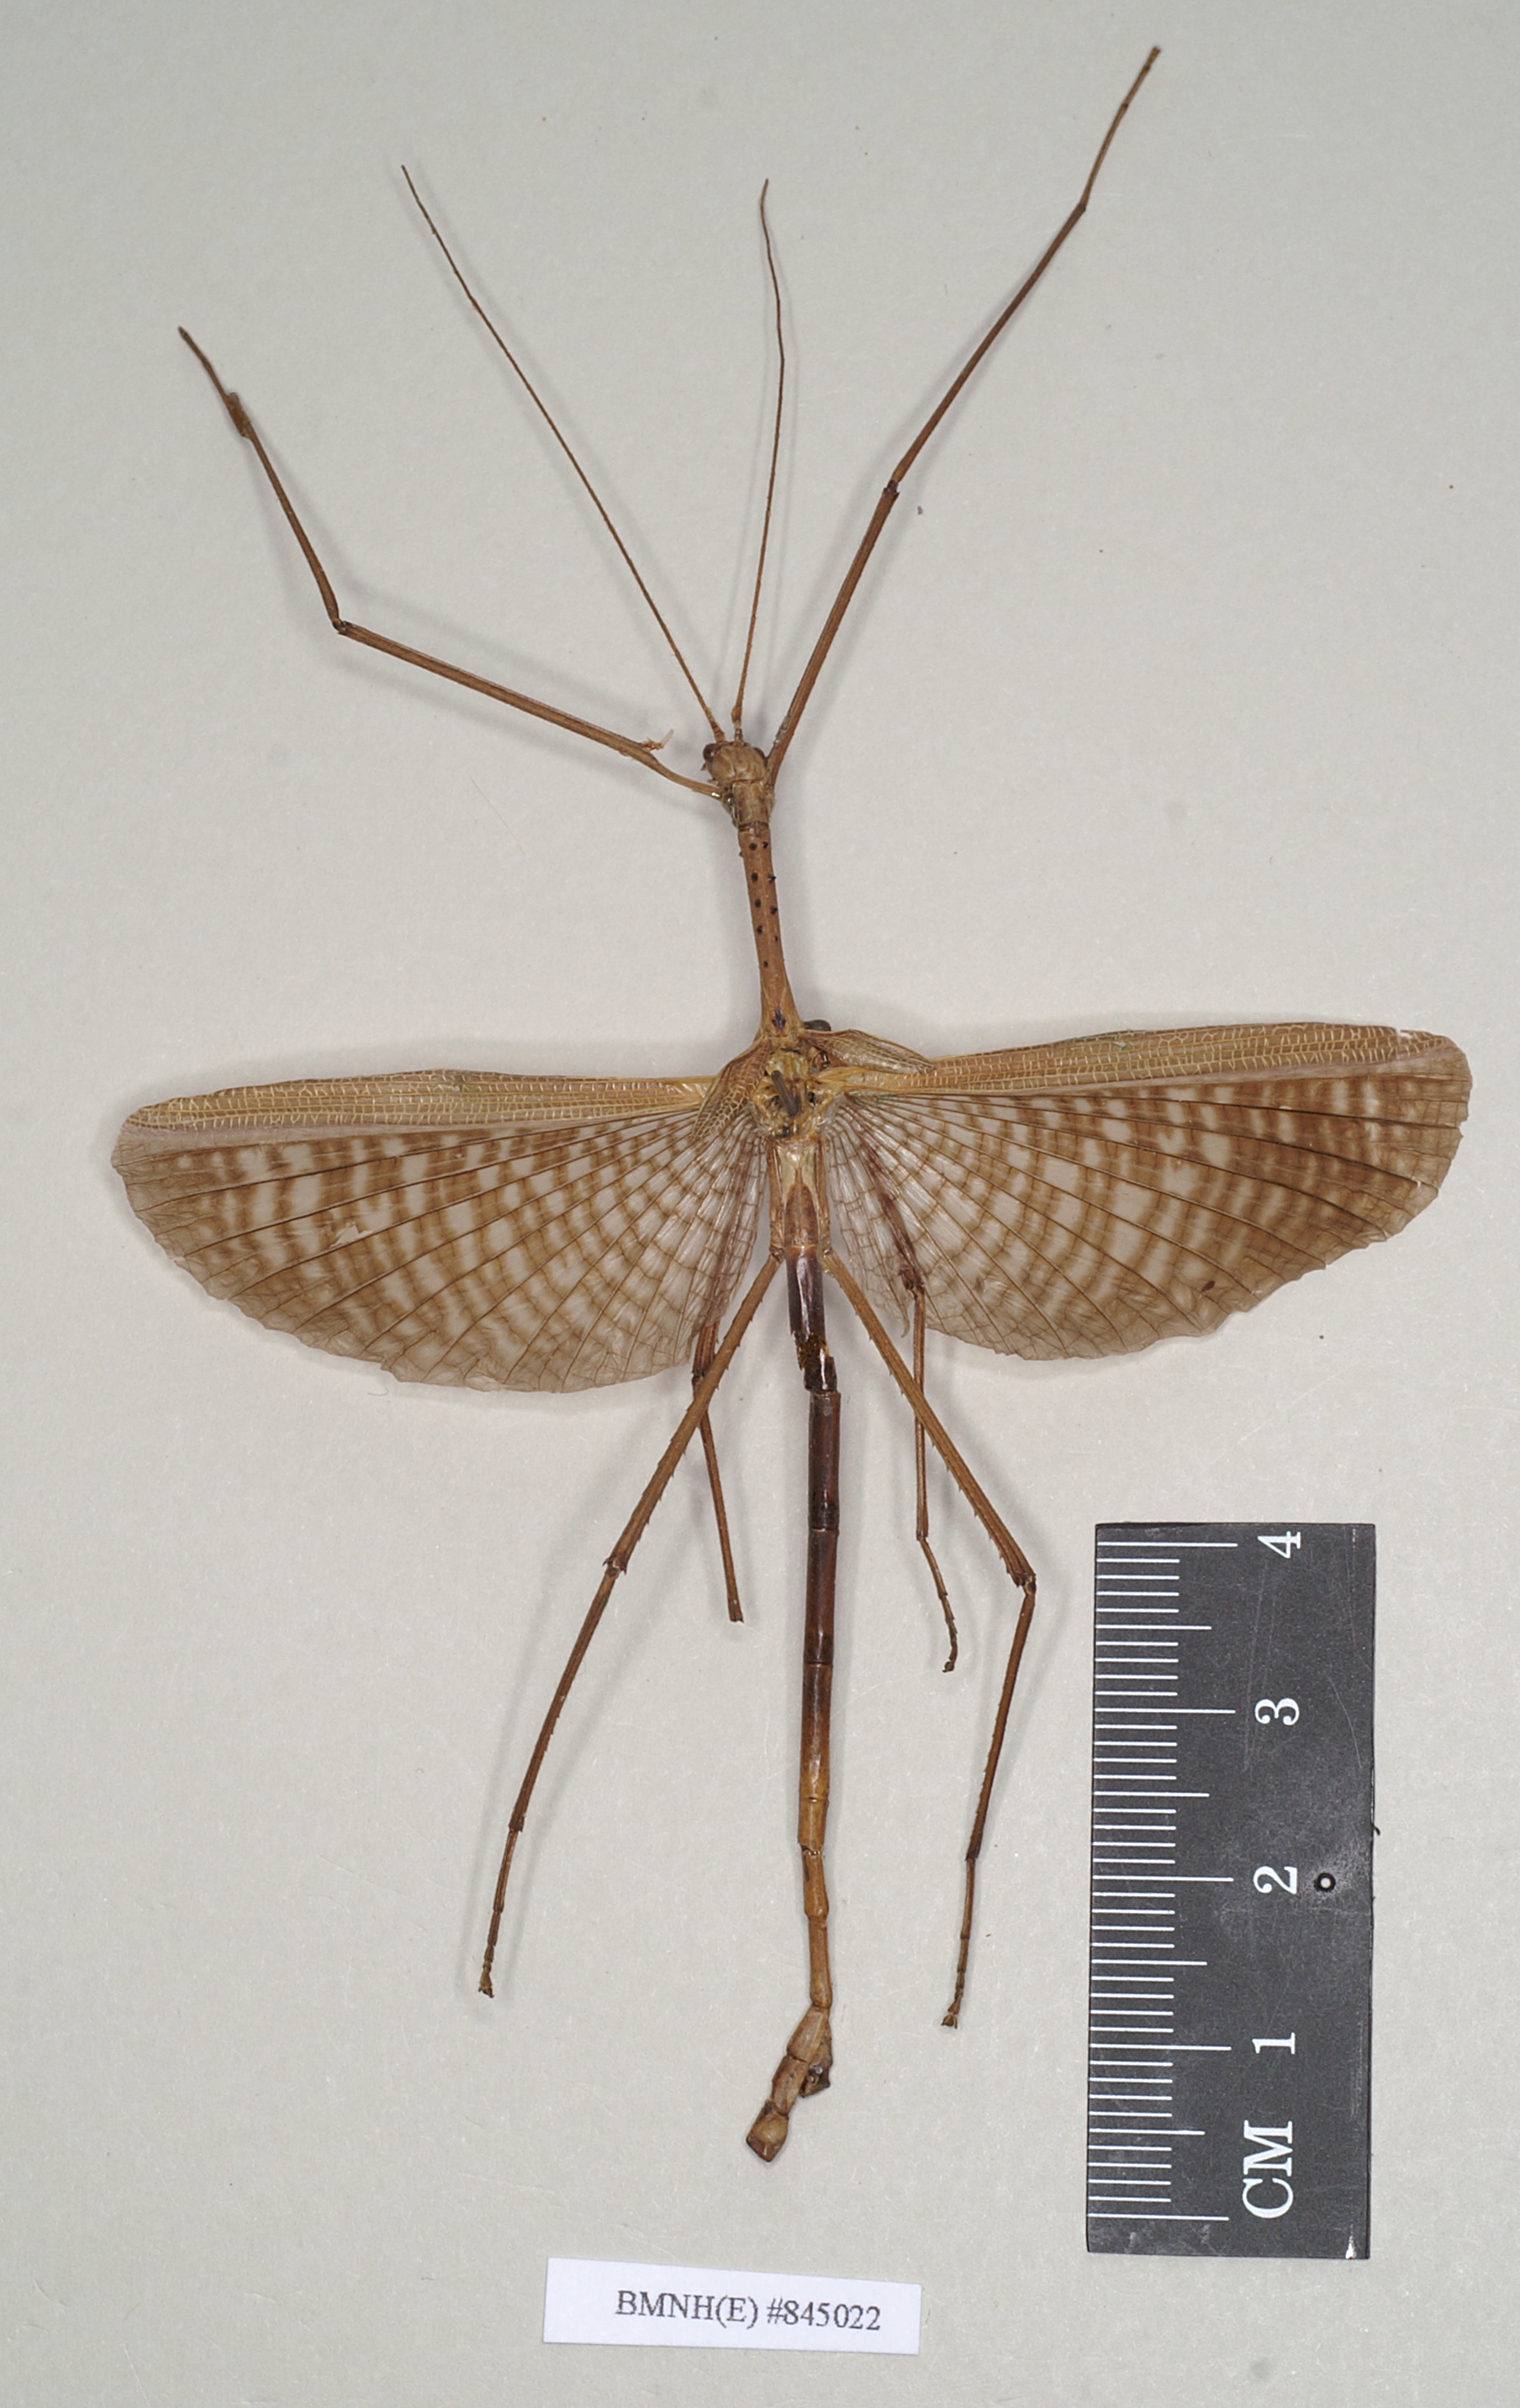 copyright Natural History Museum, London. male of Ctenomorpha tessulata (syntype). Depicts CollectionObject 1558212; NHMUK(SF IMPORT DUPLICATE) 845022, 464d8bf8-b5de-4bc4-a20e-1f290bc5ab0b, a CollectionObject.